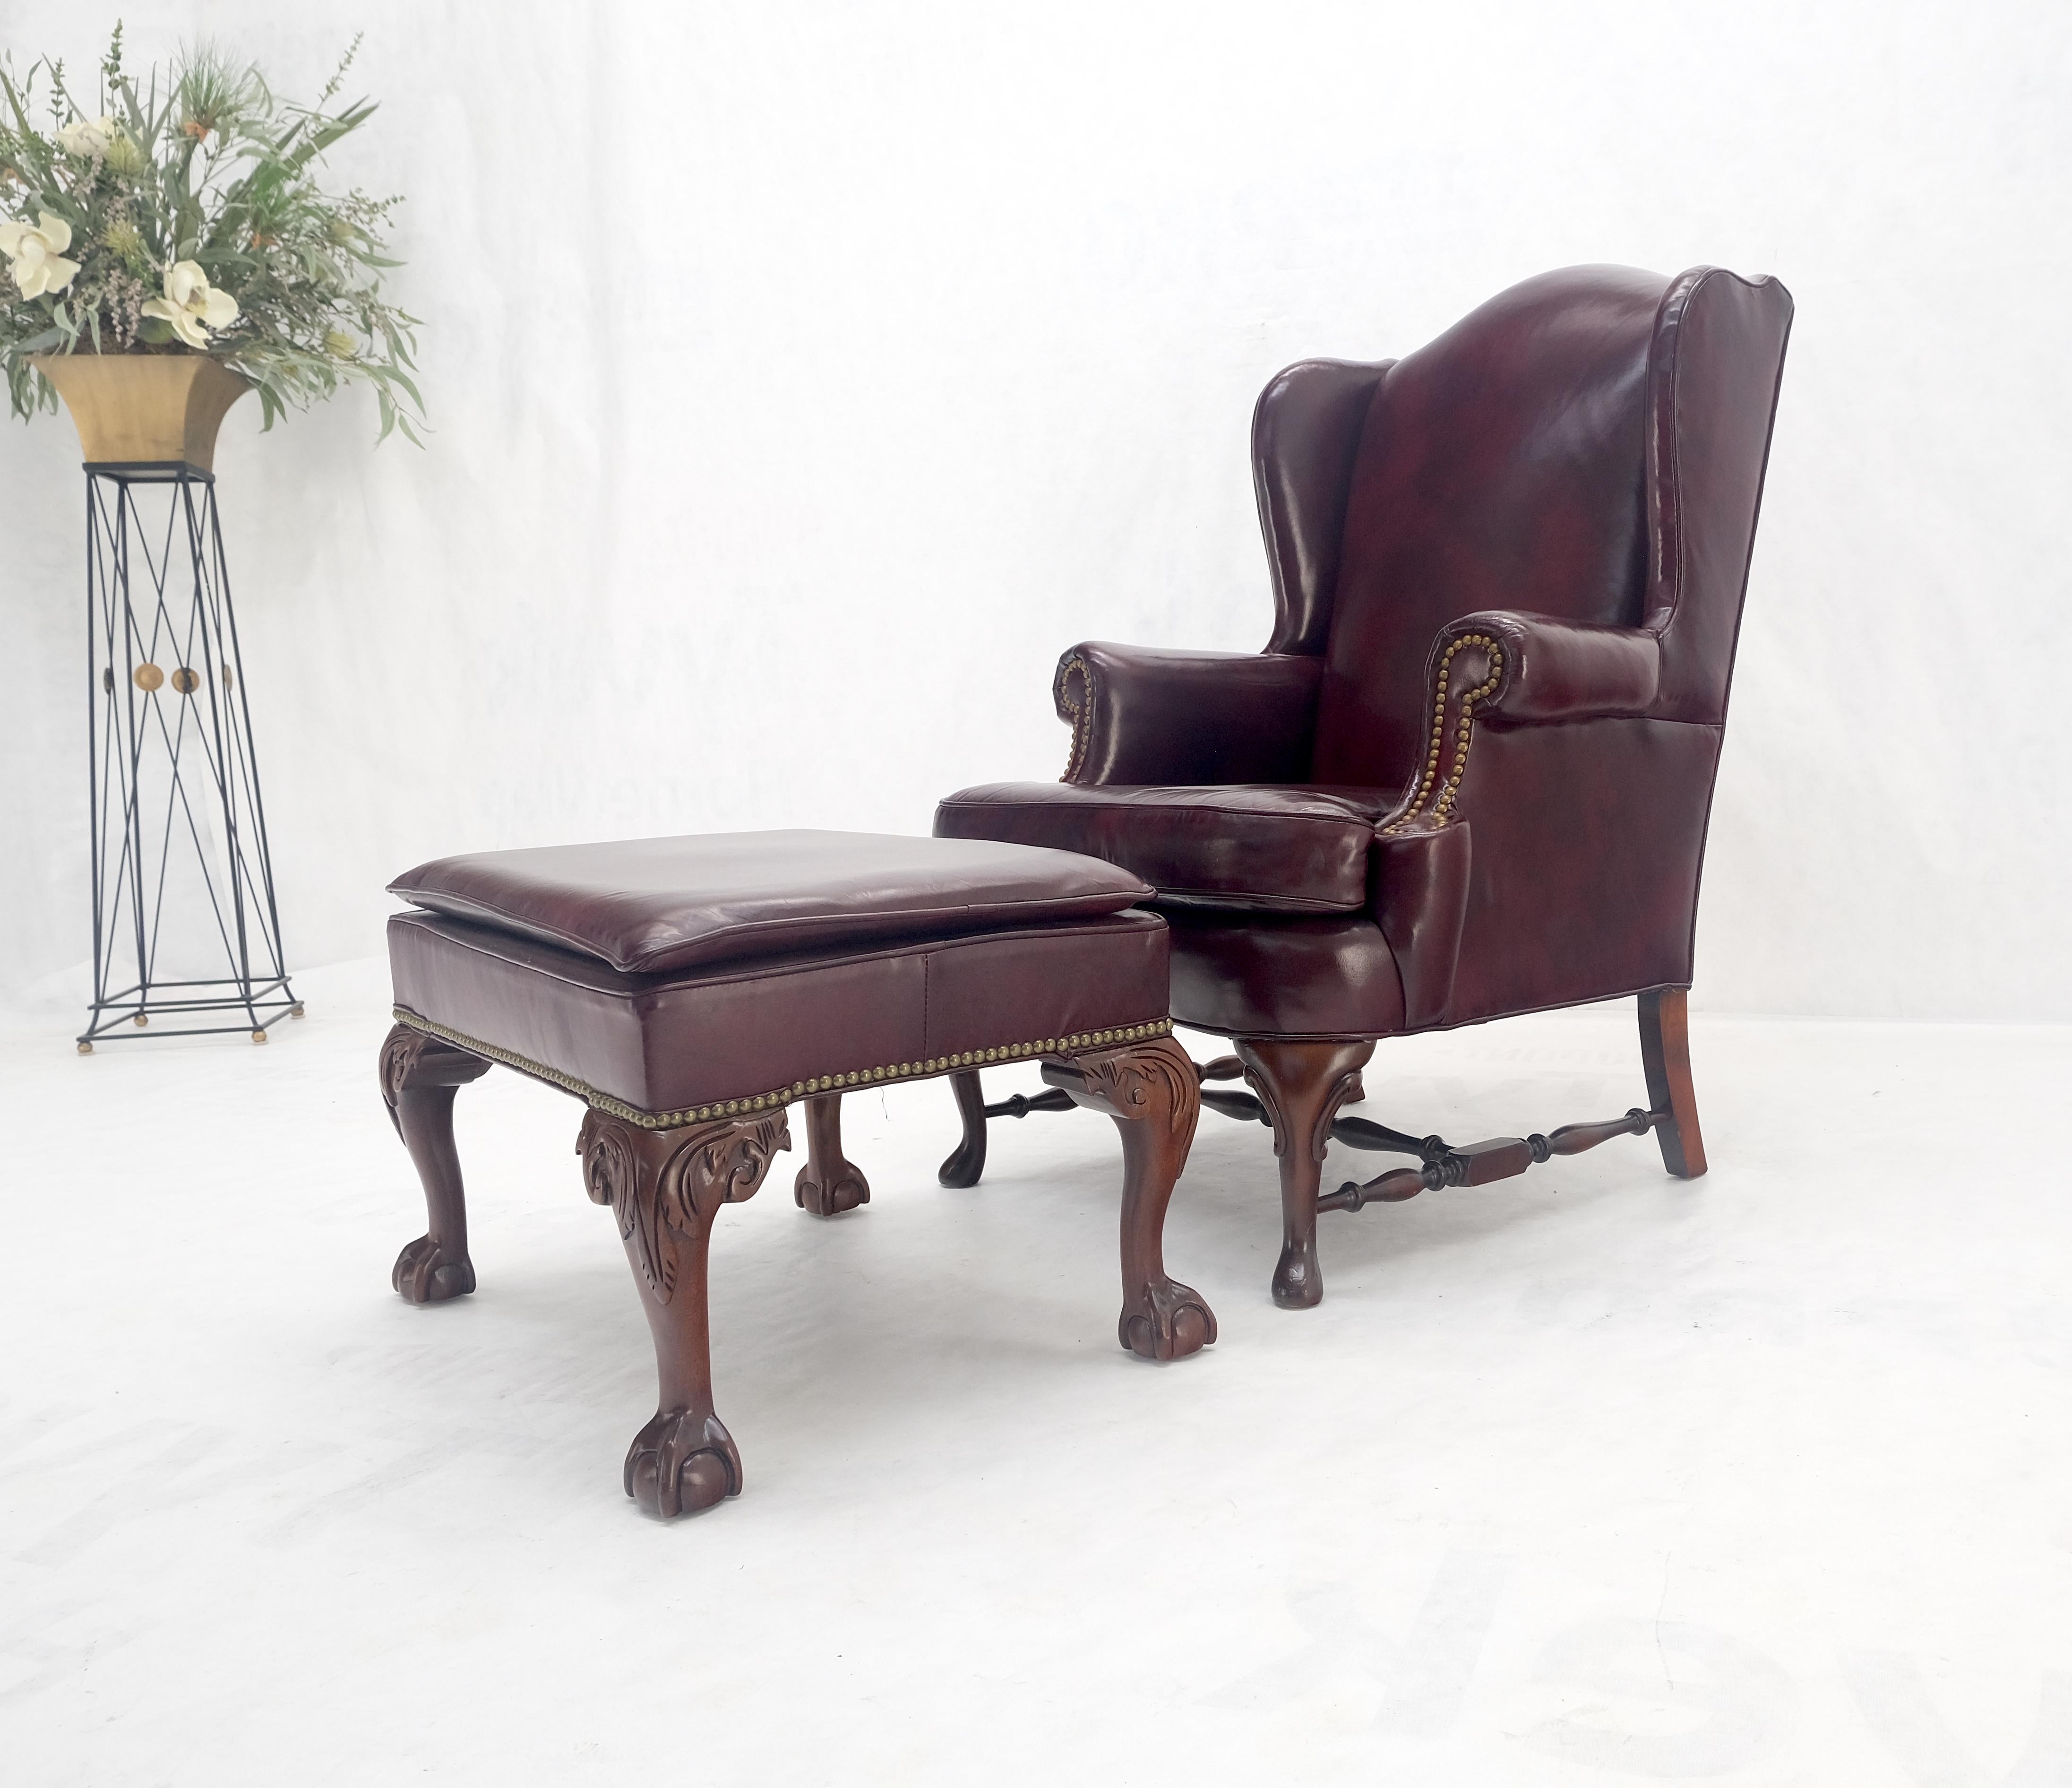 Chippendale Kindel Burgundy Leather Upholstery Carved Mahogany Legs Wingback Chair & Ottoman en vente